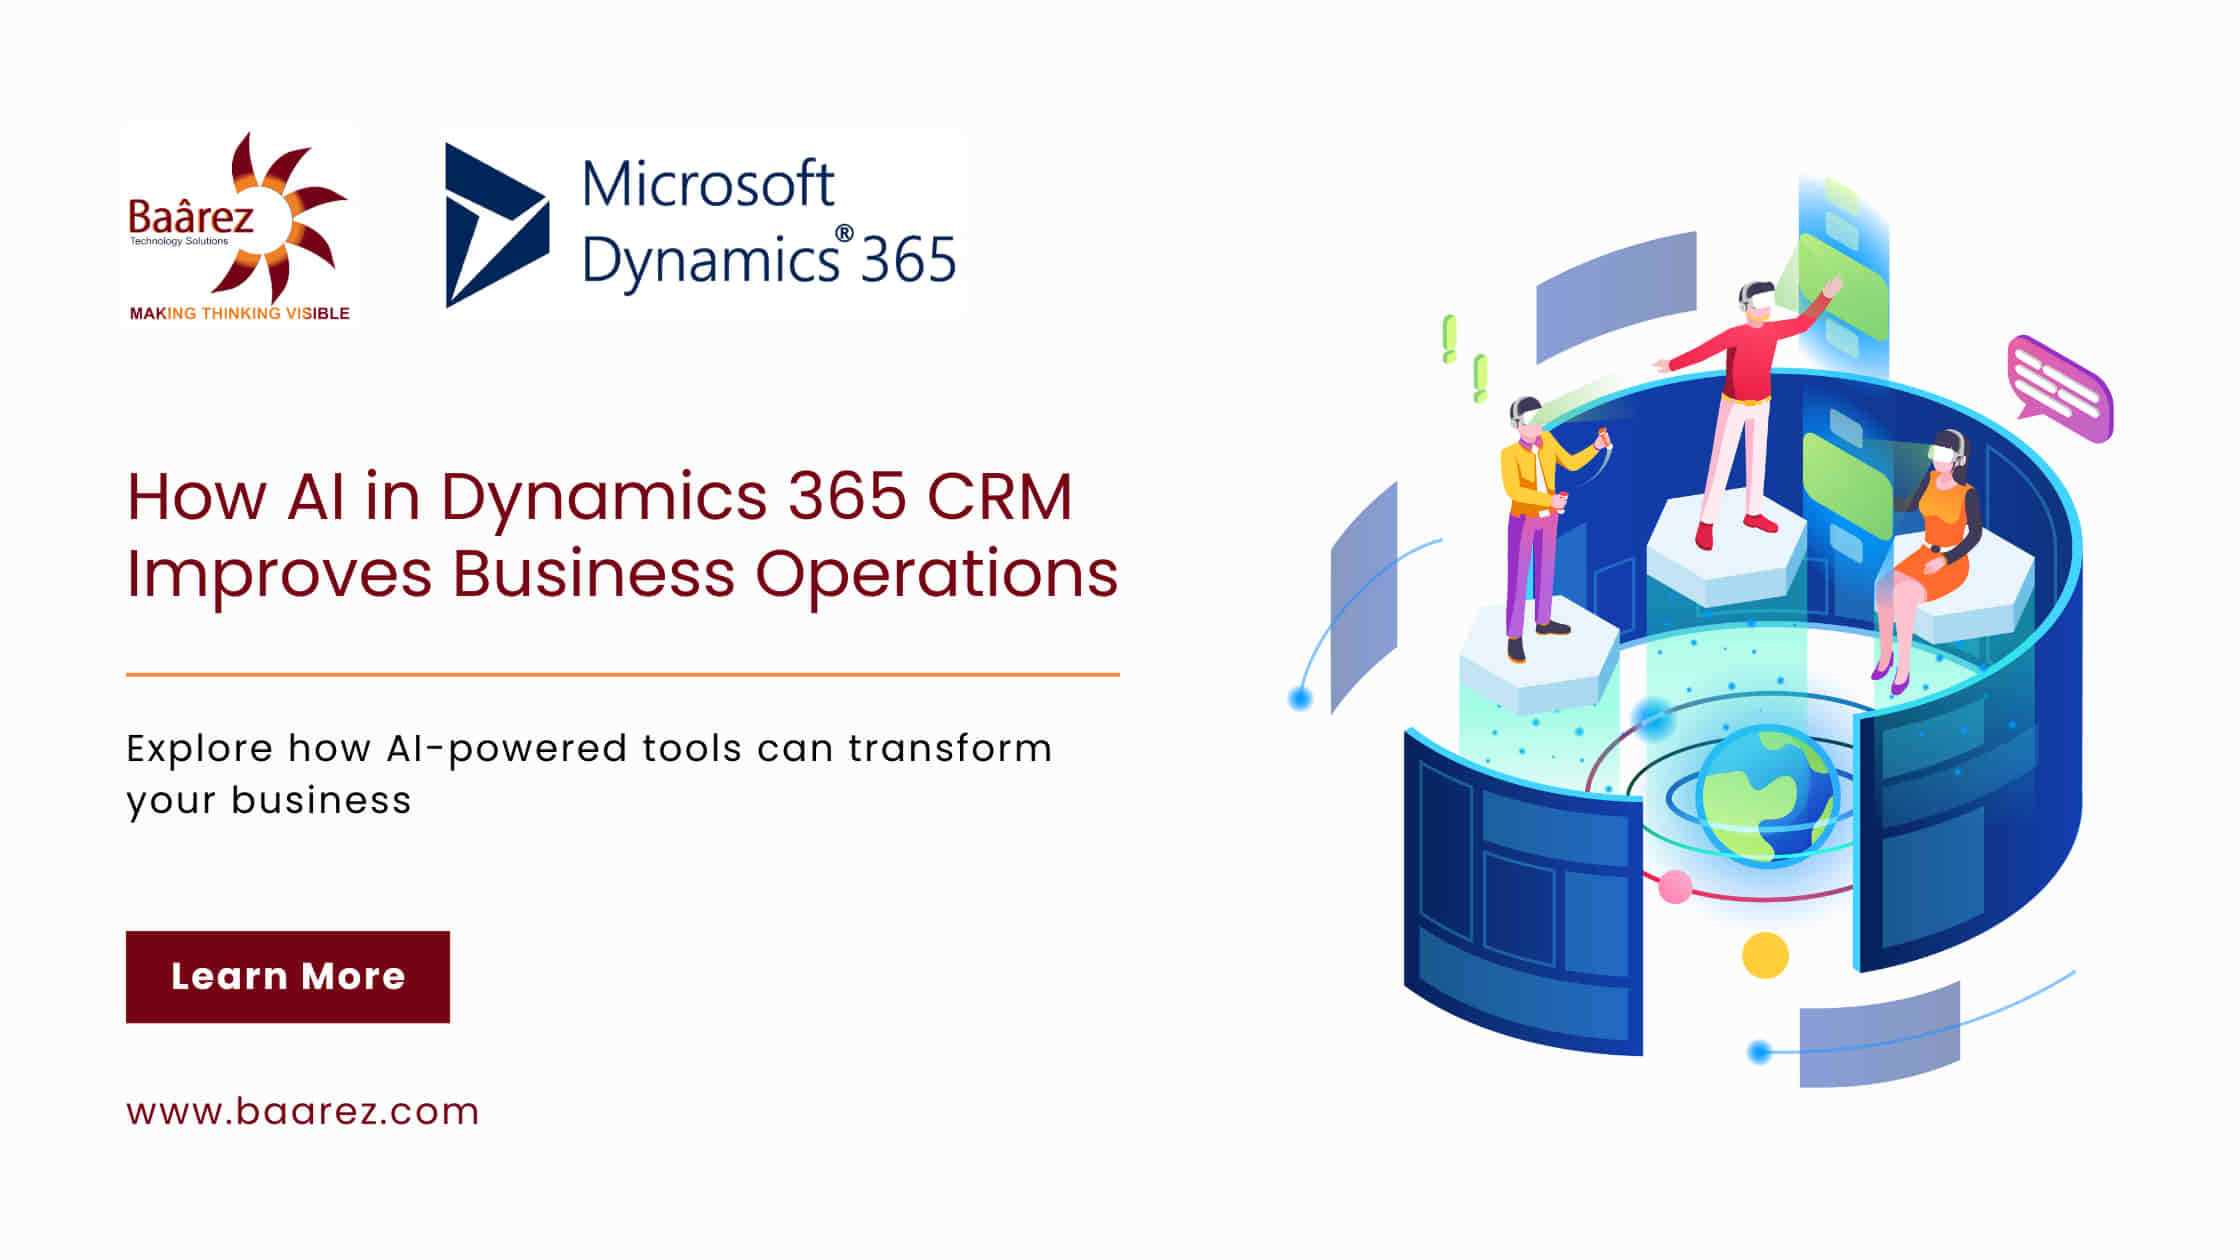 How AI in Dynamics 365 CRM Improves Business Operationss